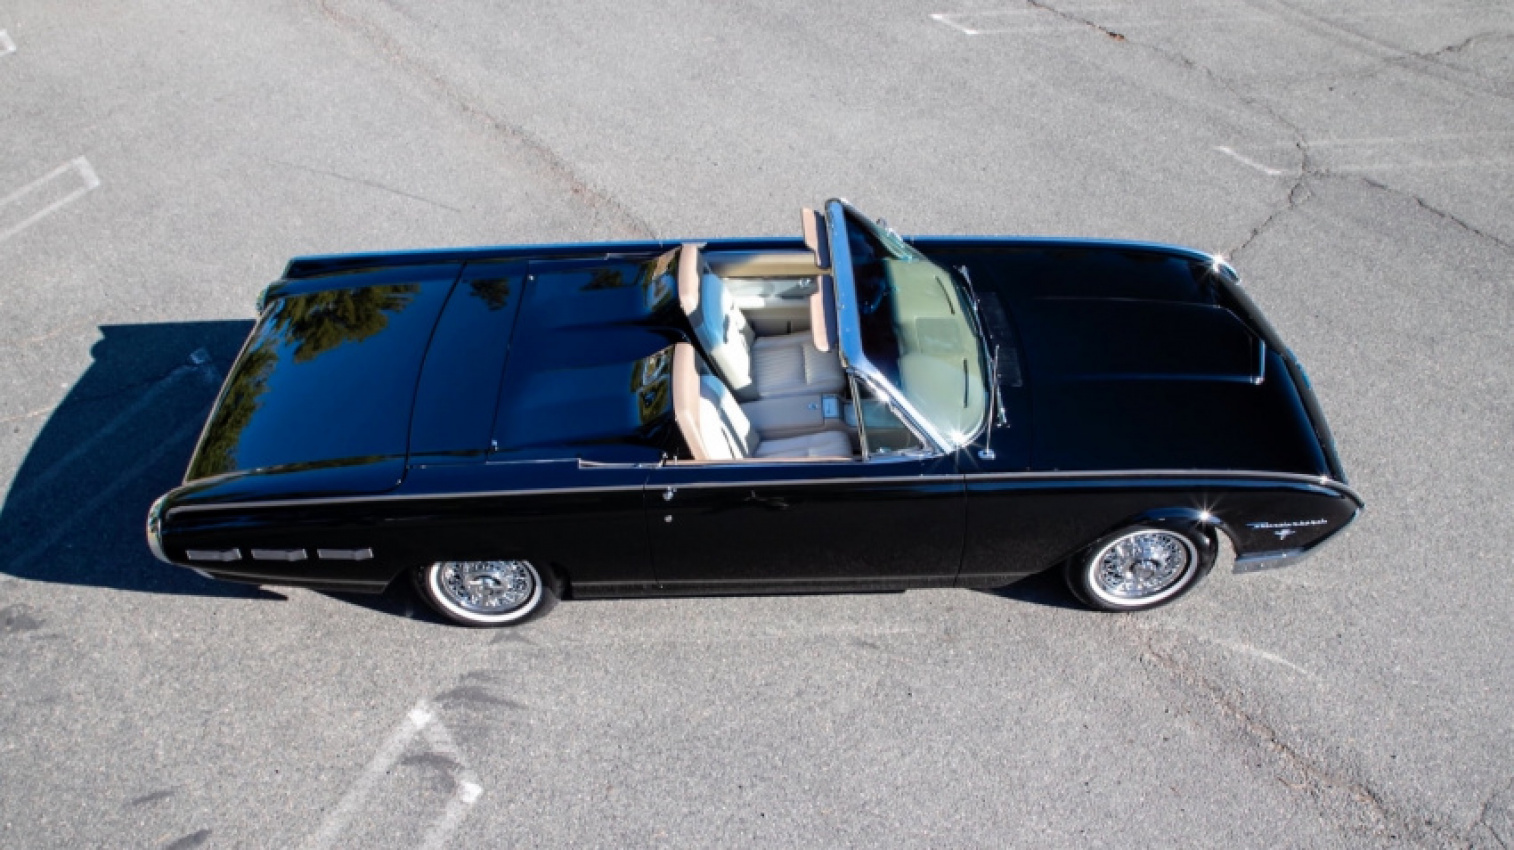 autos, cars, ford, hp, news, auction, classics, ford thunderbird, used cars, rare 390 hp m-code roadster is a 1962 ford thunderbird with talons